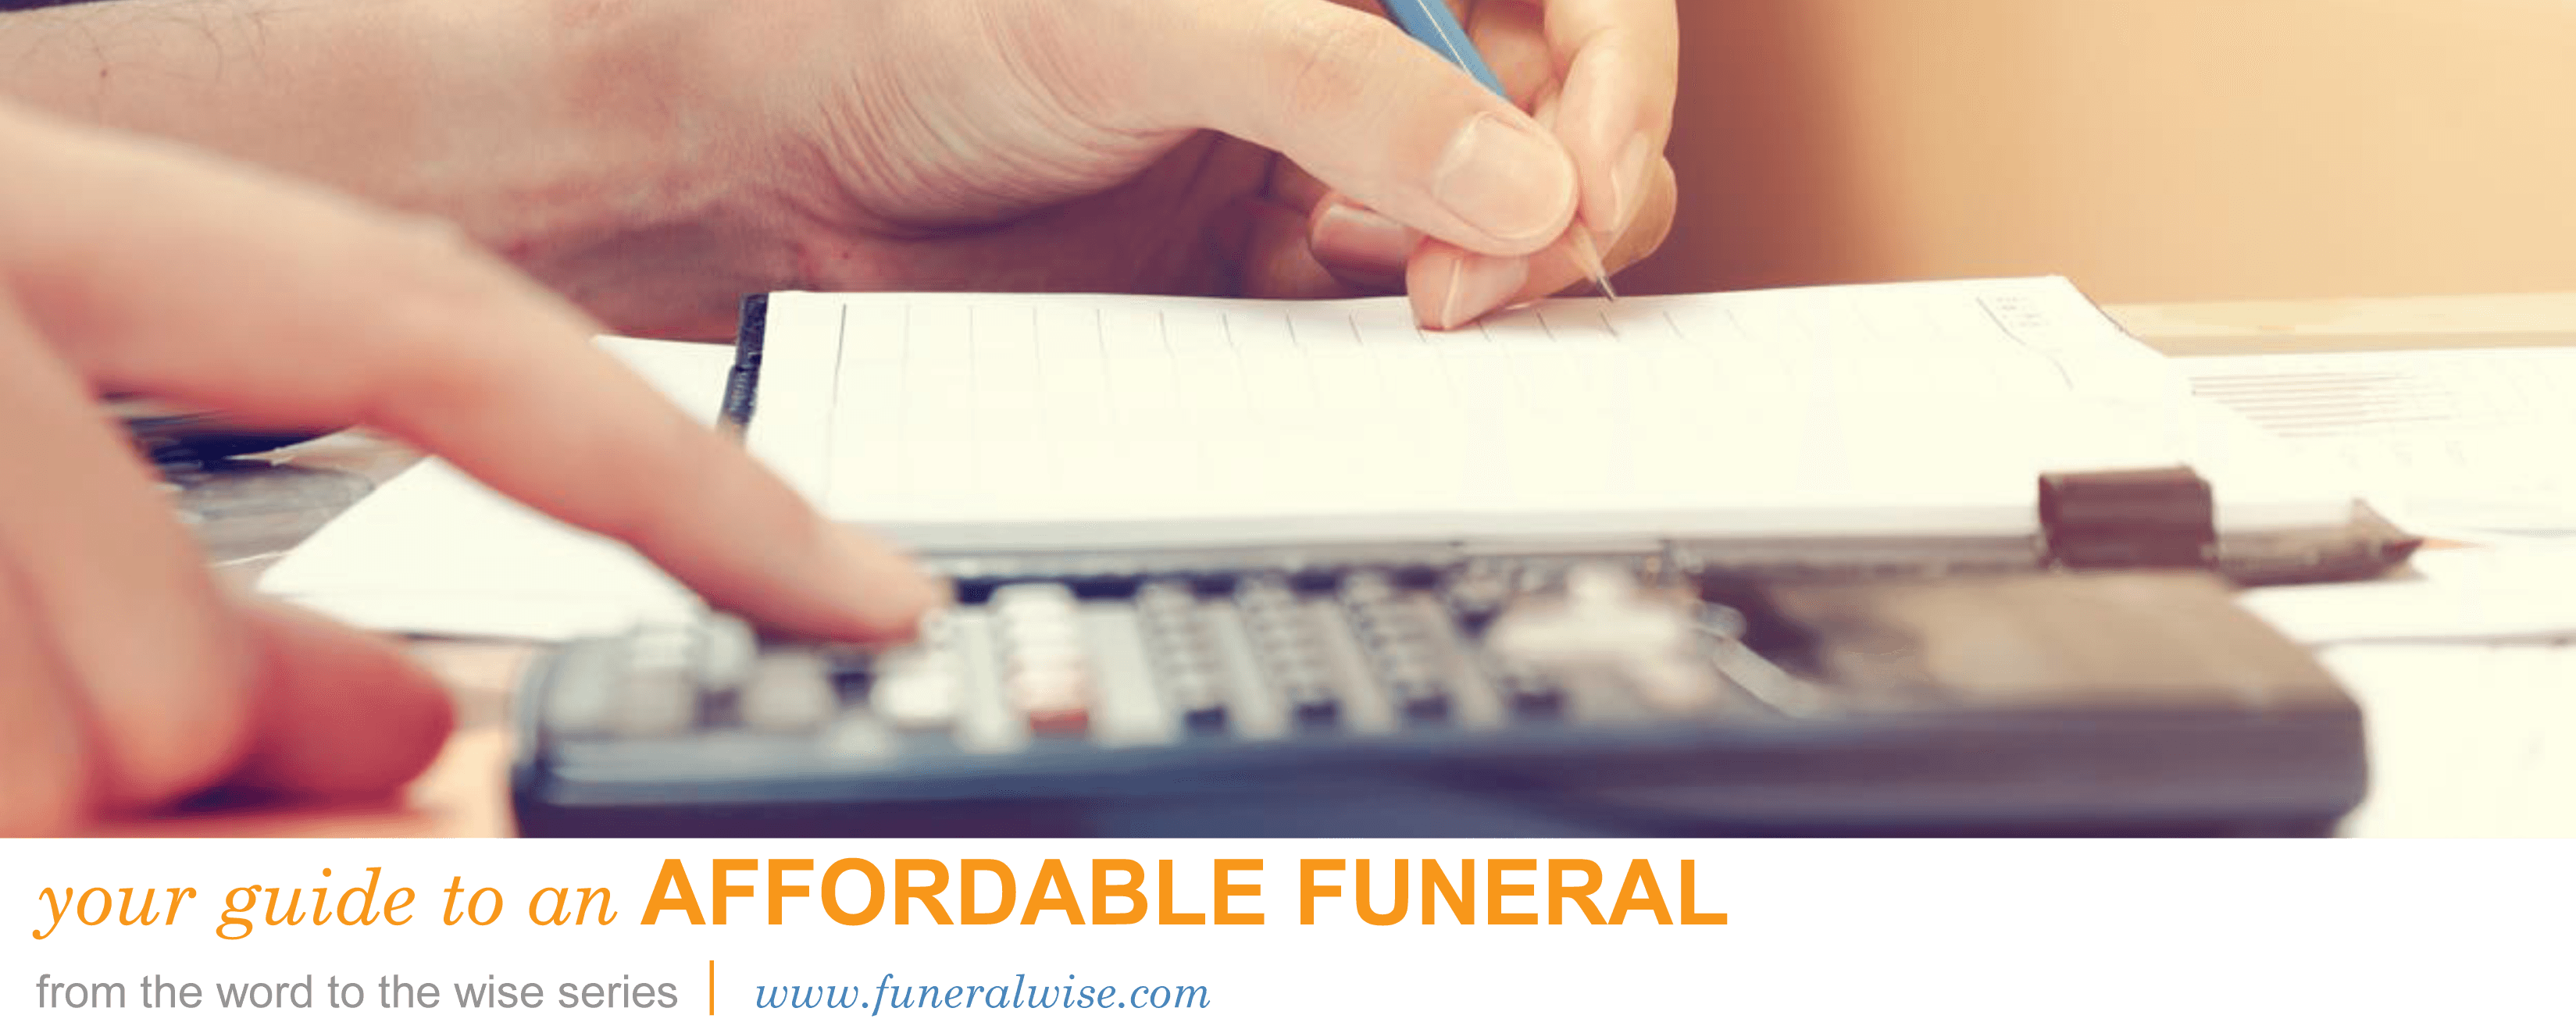 Affordable Funeral Guide download